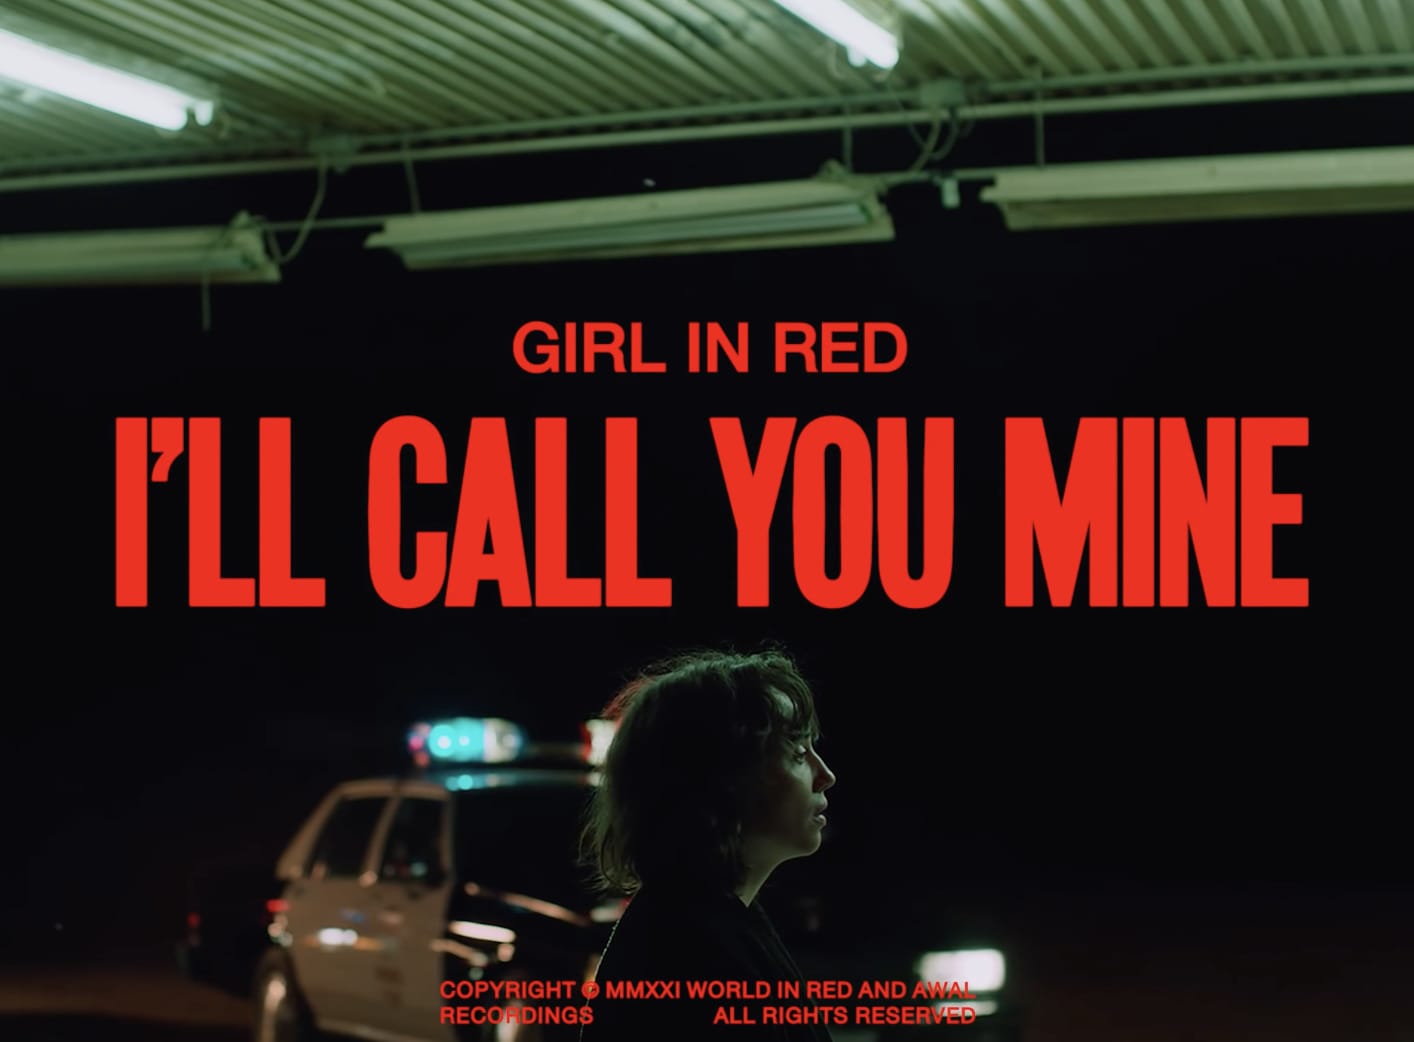 Girl in red : "I'll Call You Mine", un clip aux faux airs de "Thelma & Louise" 1